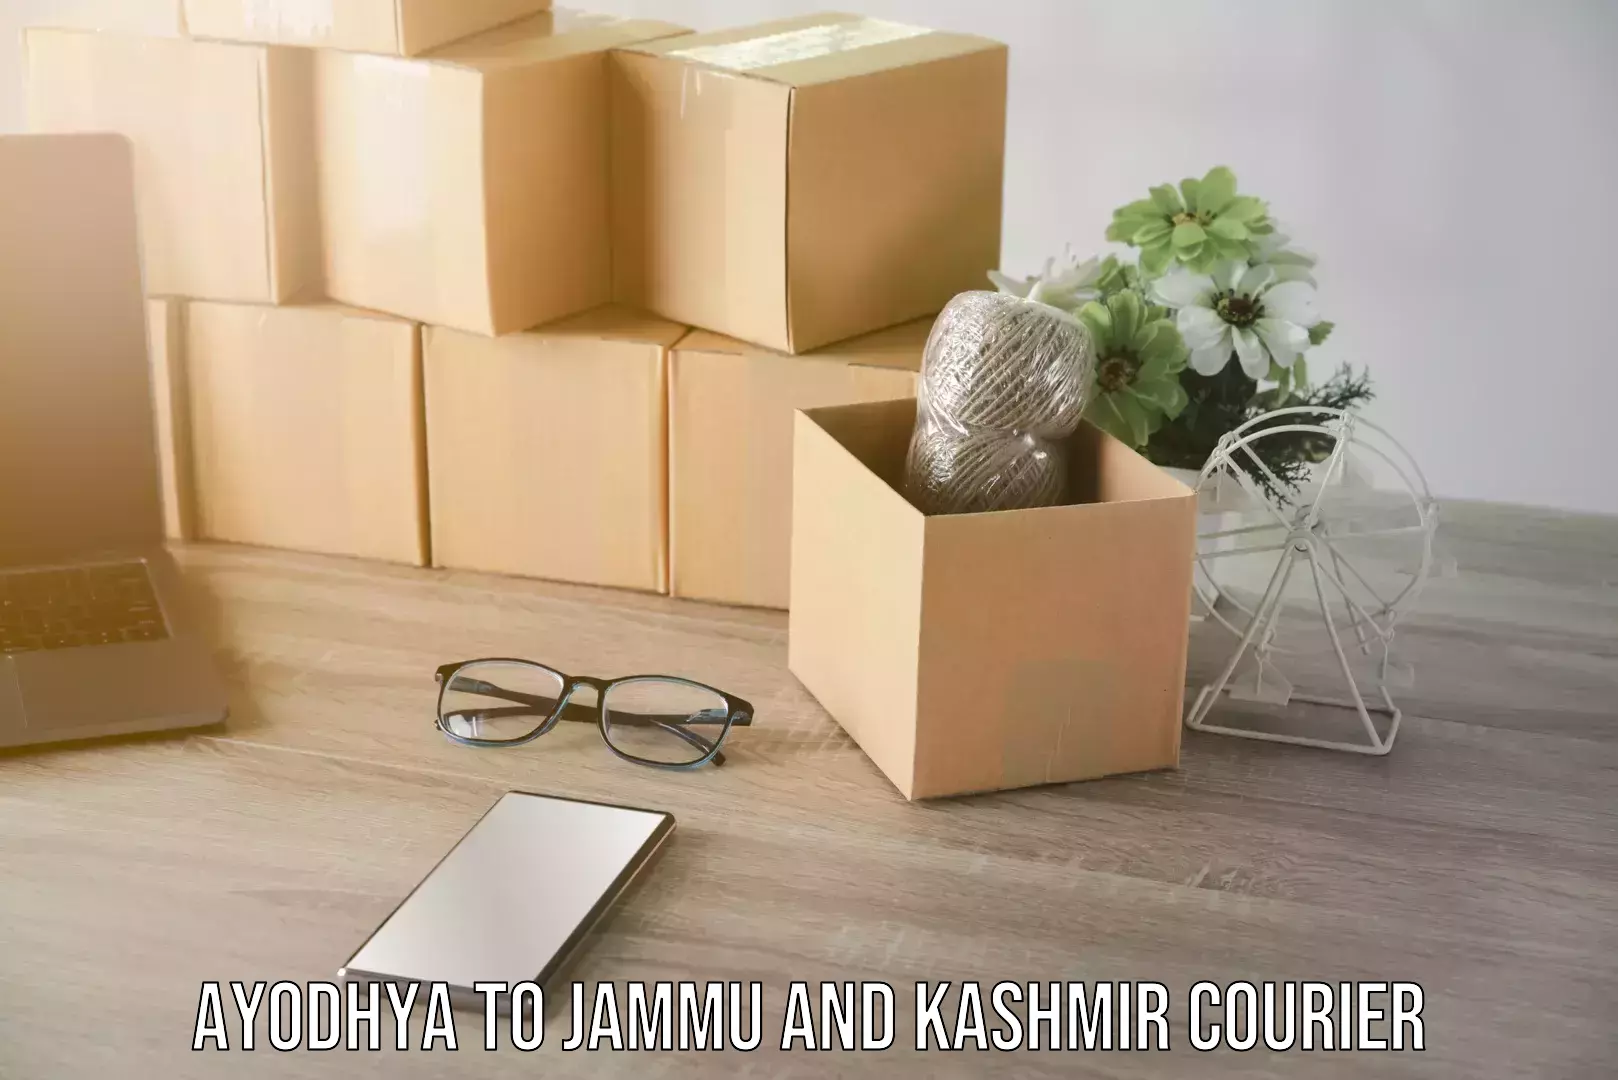 Nationwide courier service Ayodhya to Jammu and Kashmir